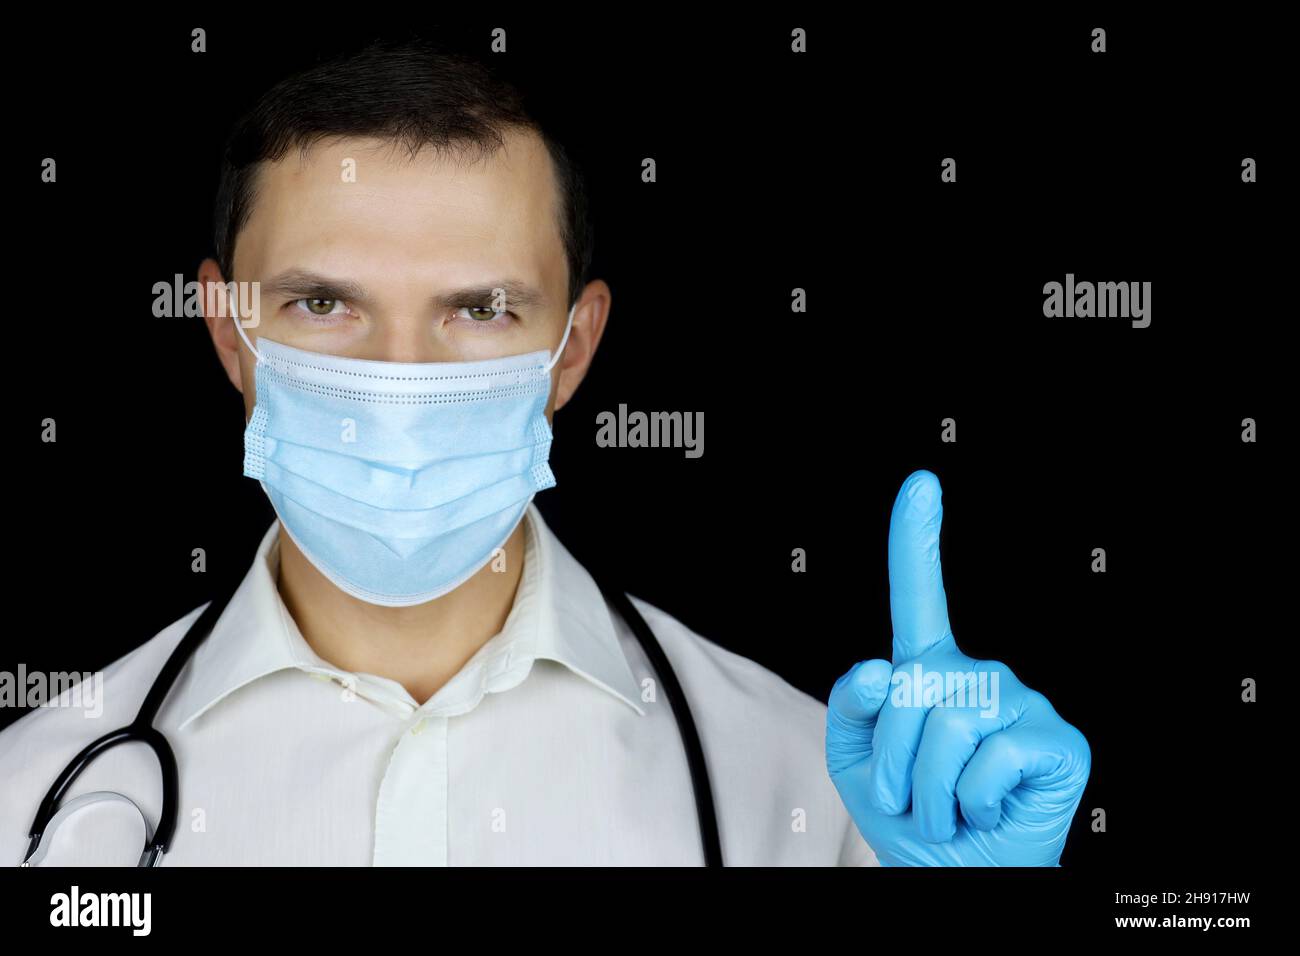 Doctor in disposable face and medical gloves mask points up with his finger. Concept of call for participation, health care, coronavirus protection Stock Photo